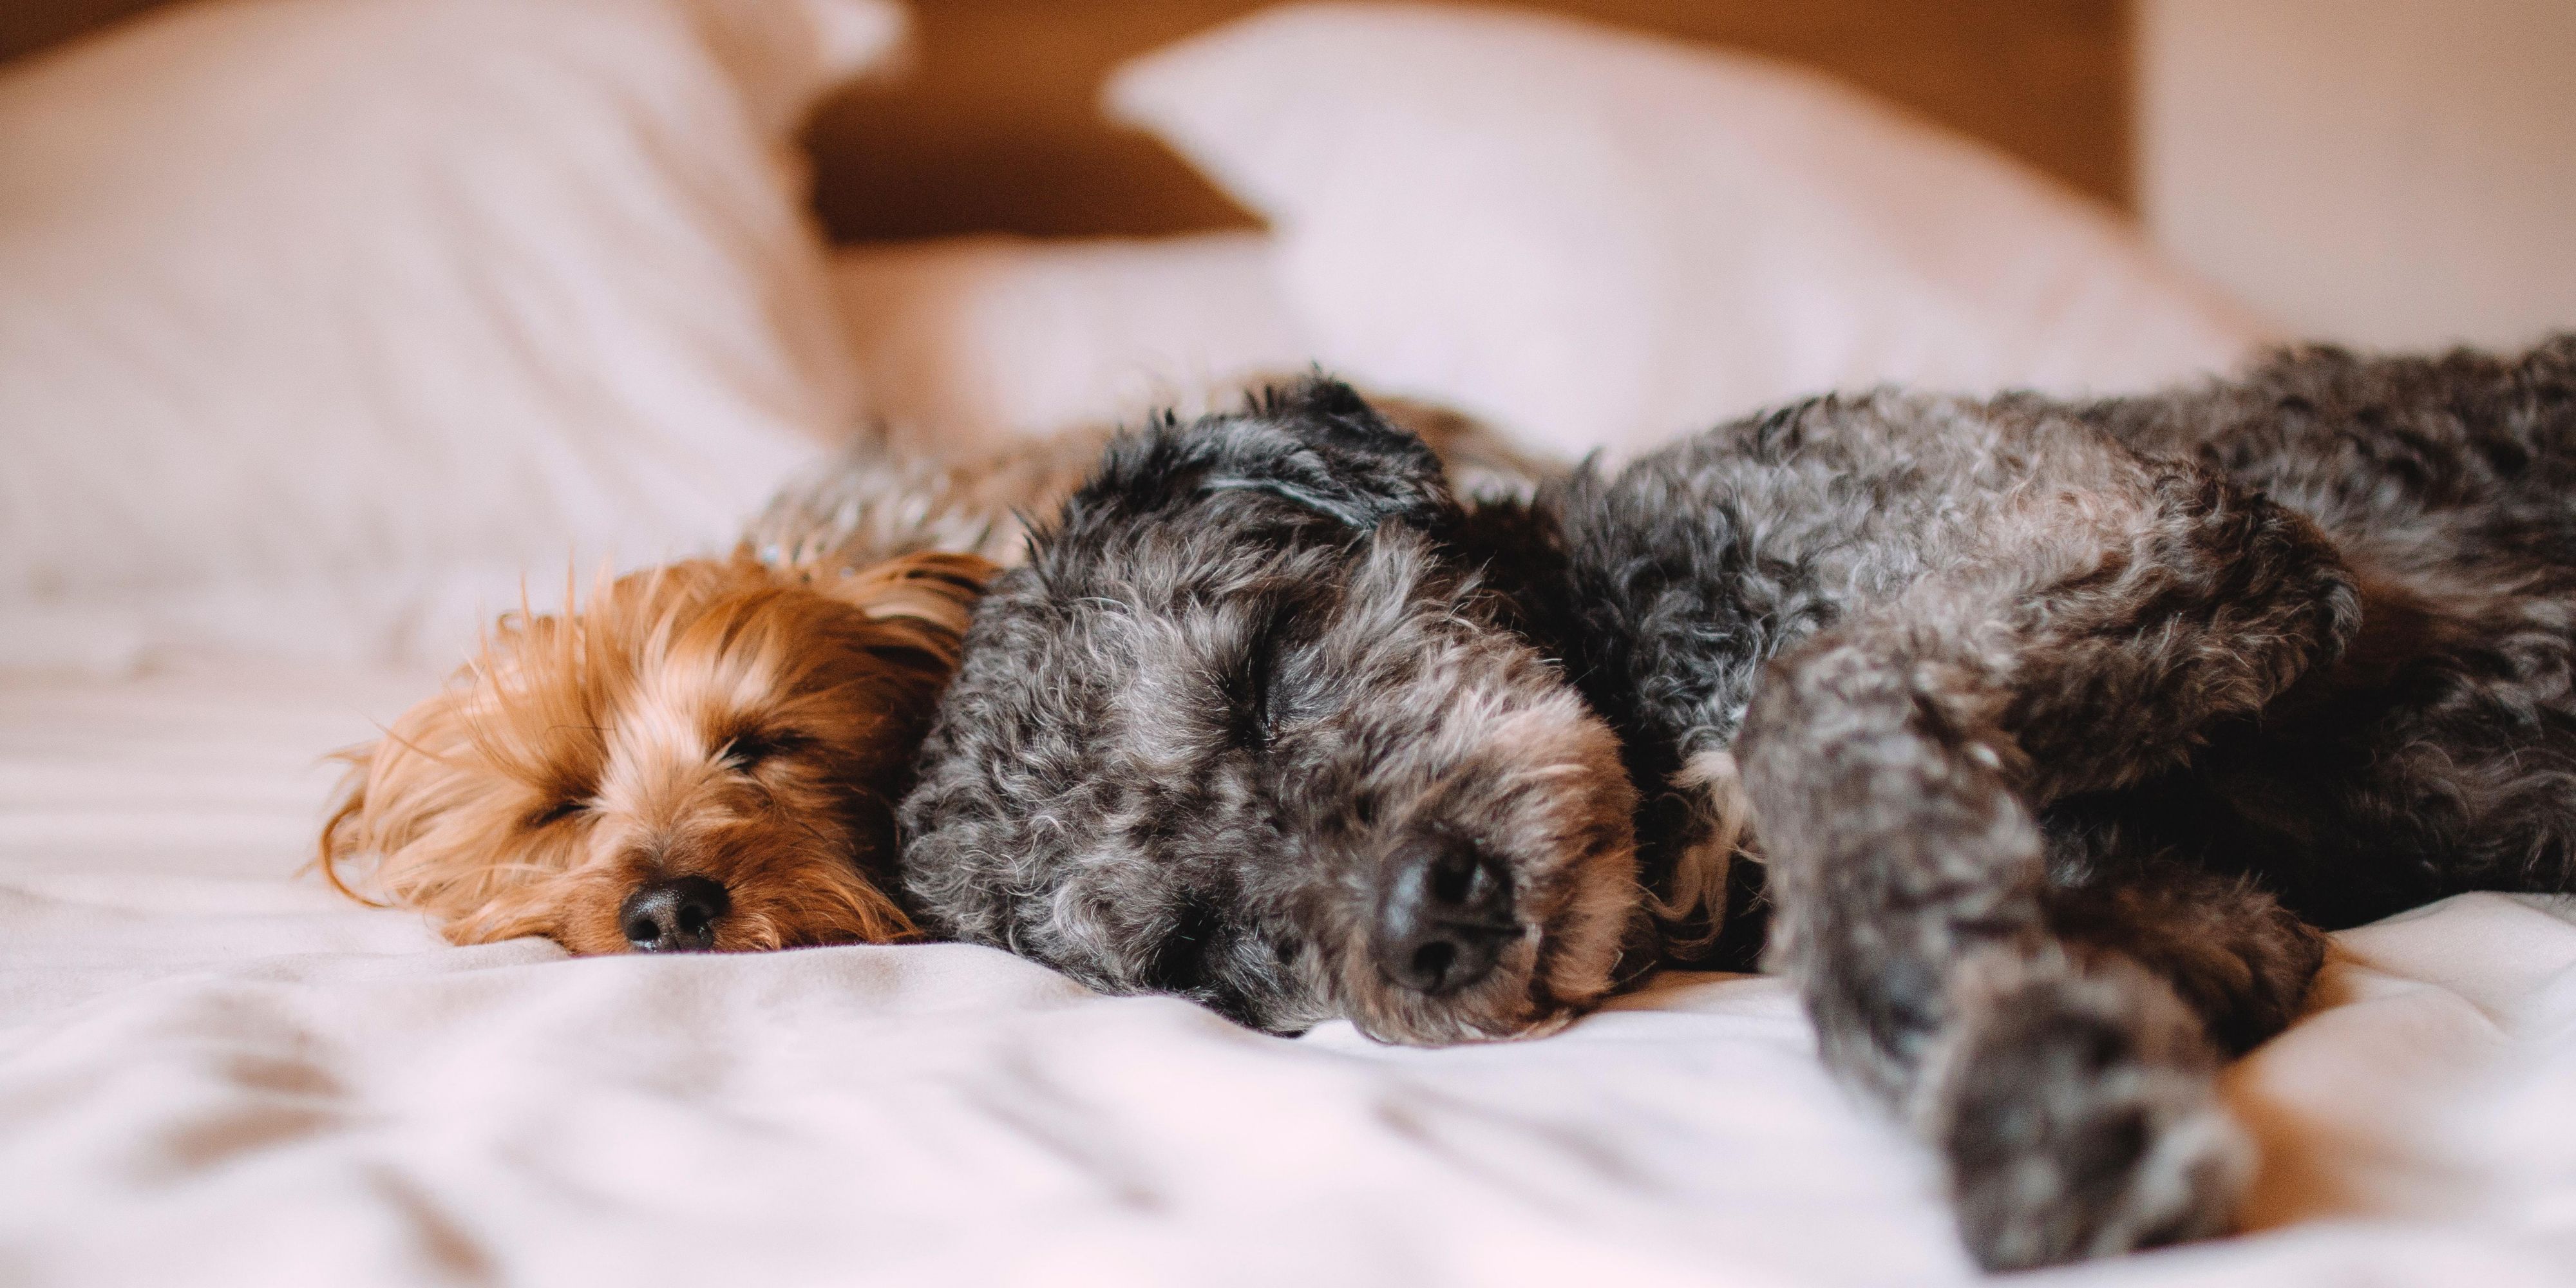 Pets are family too! We are a pet friendly hotel. Call us today to book your pet friendly room.